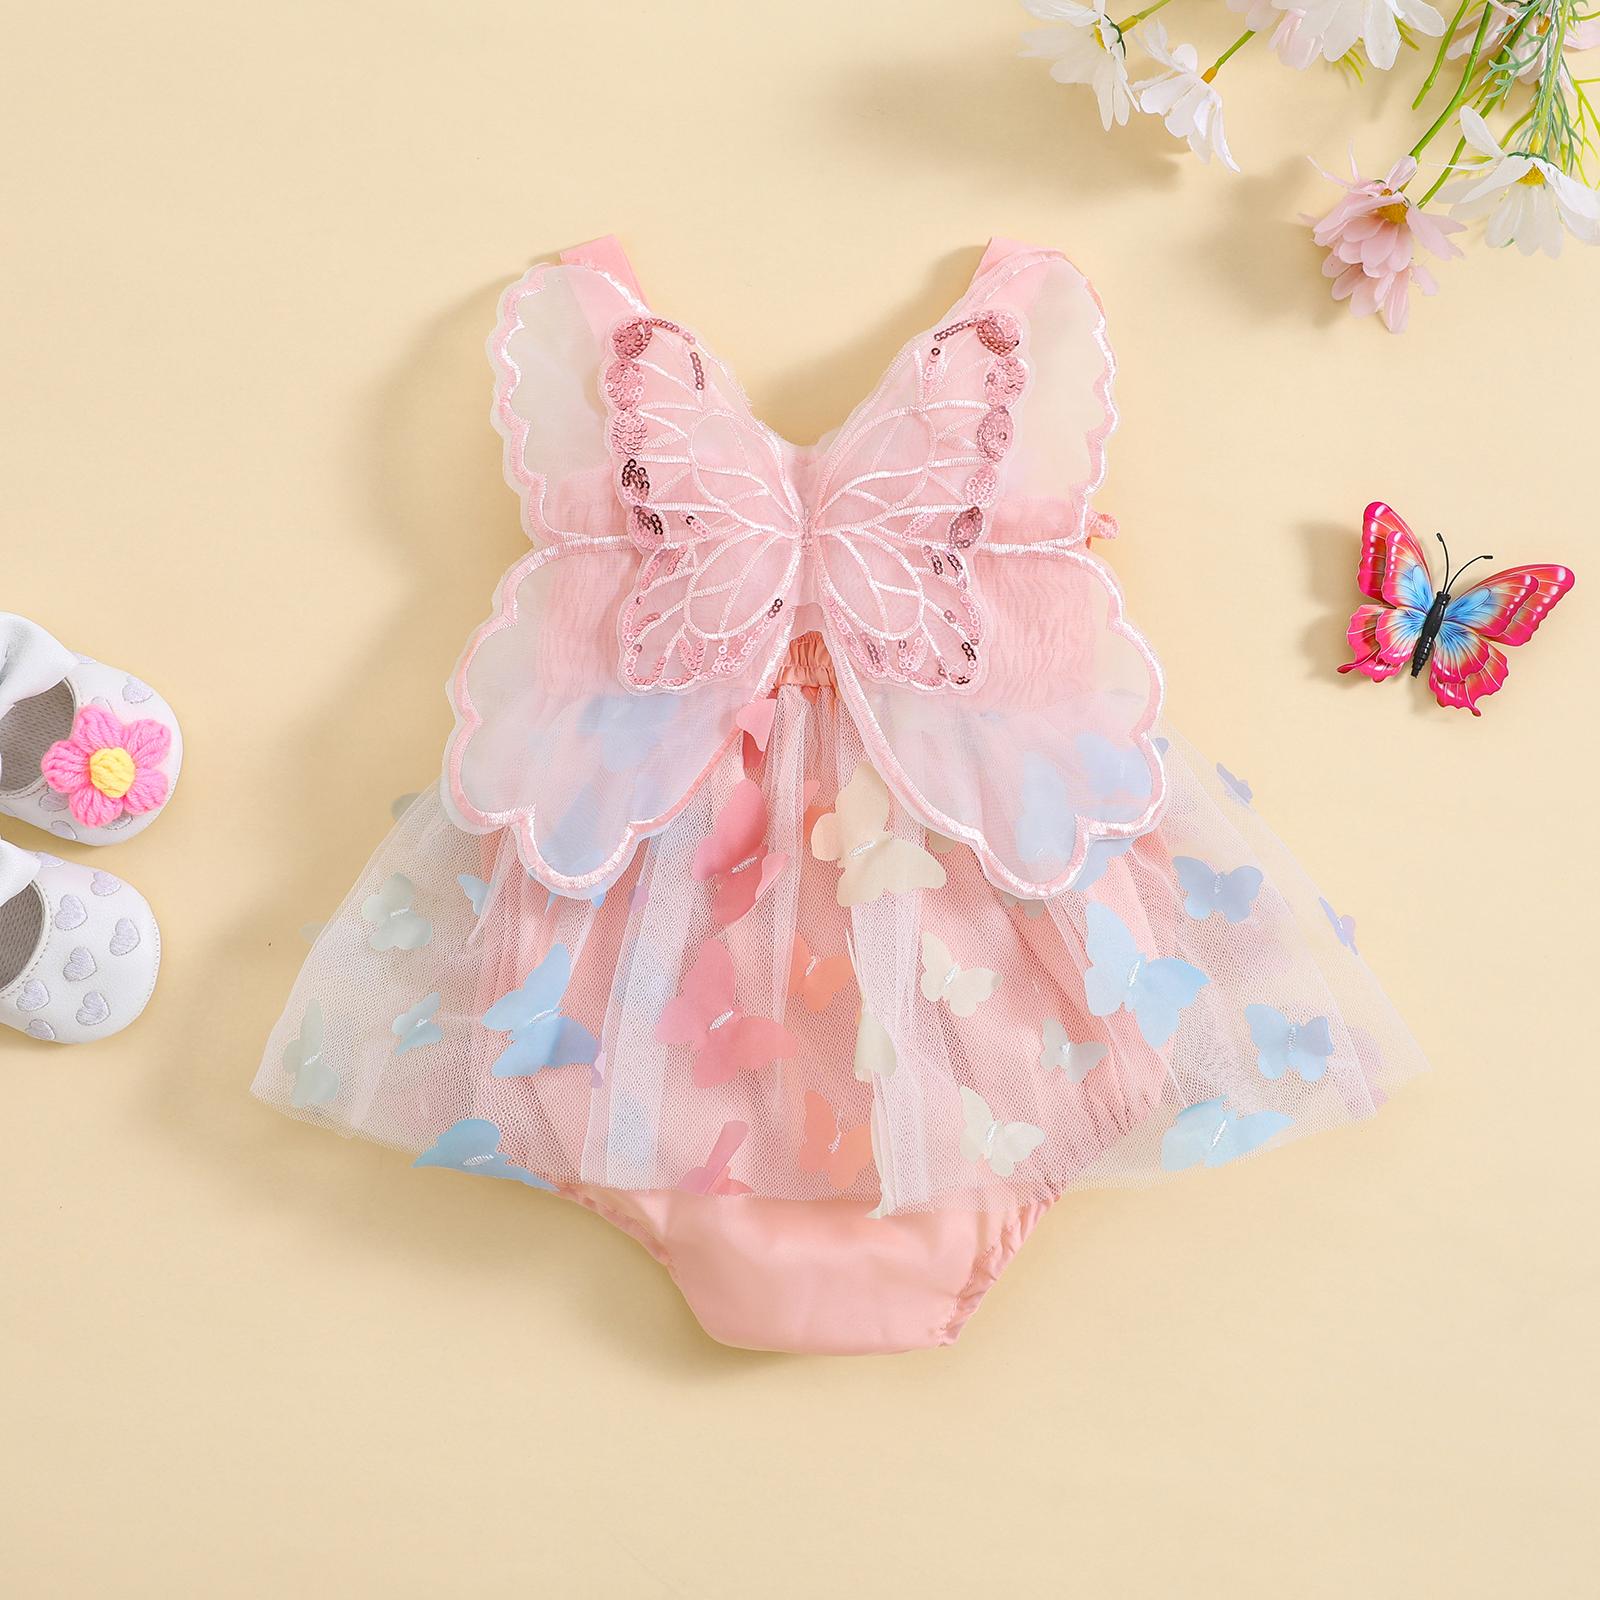 Little Fashionistas Infant Girl Rompers Dress 3 6 12 18 24 Months Butterfly Decor Sleeveless Layered Tulle Tutu Skirt Hem Cami Jumpsuits Newborn Clothes Baby Bodysuits